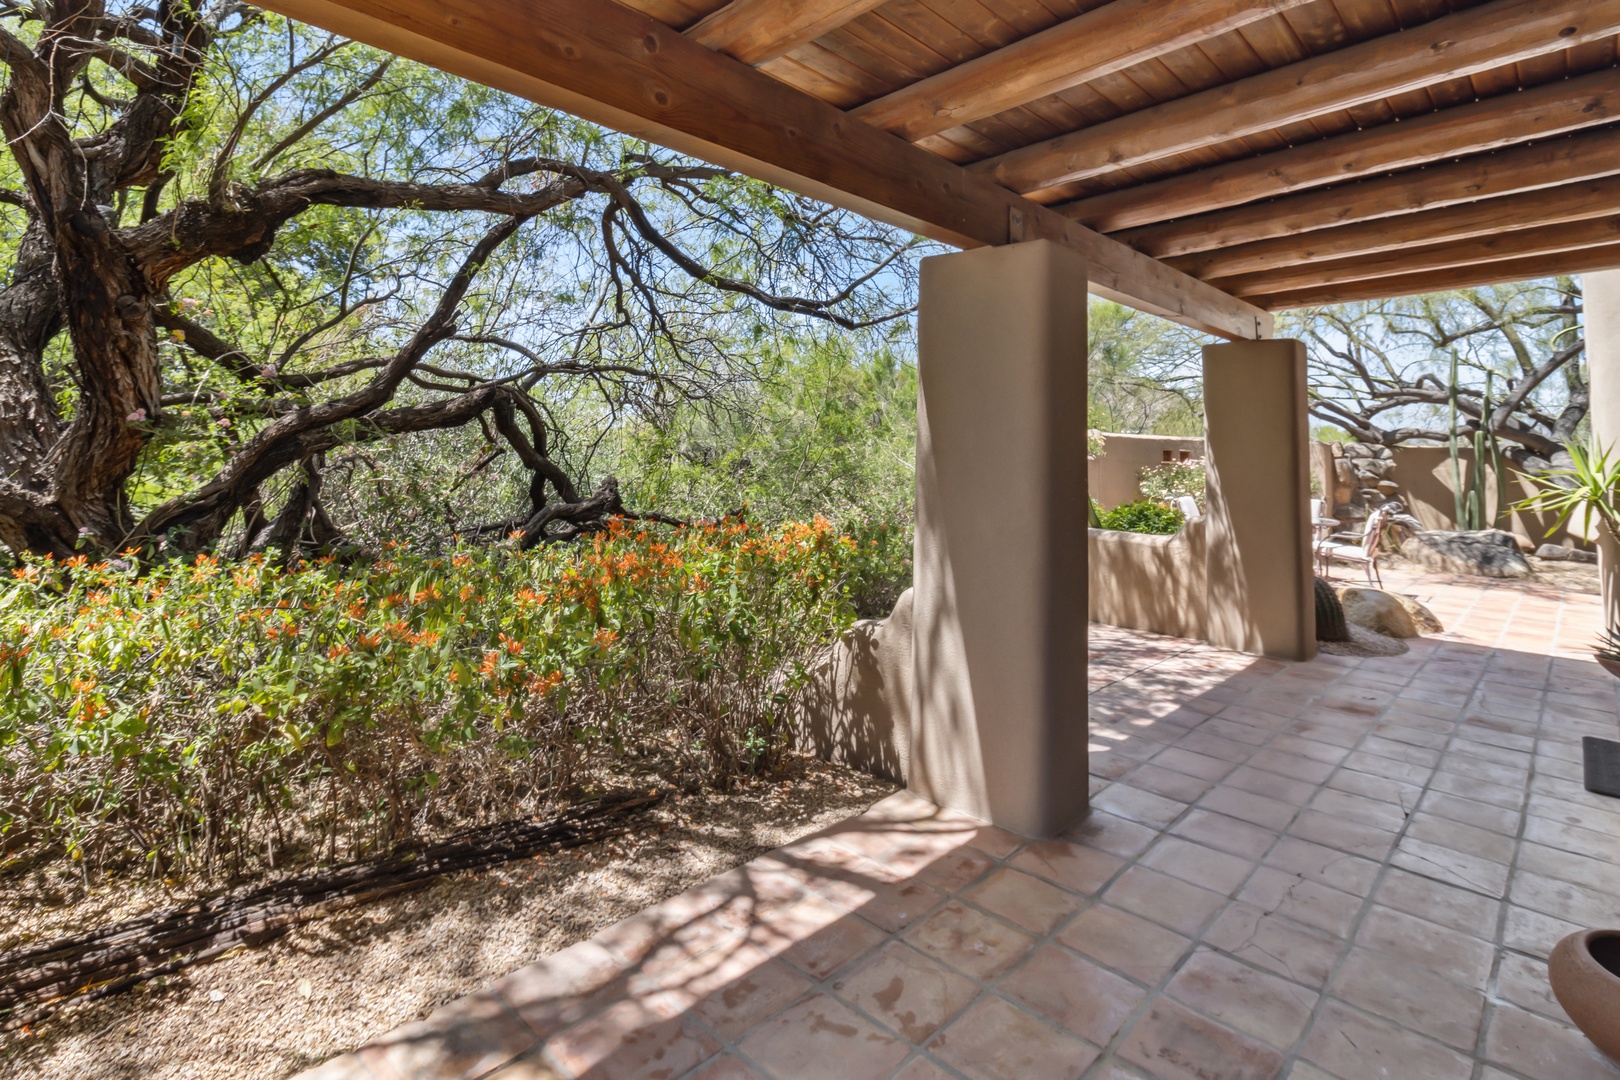 Scottsdale Vacation Rentals, Boulders Hideaway Villa - External patio surrounded by beautiful nature